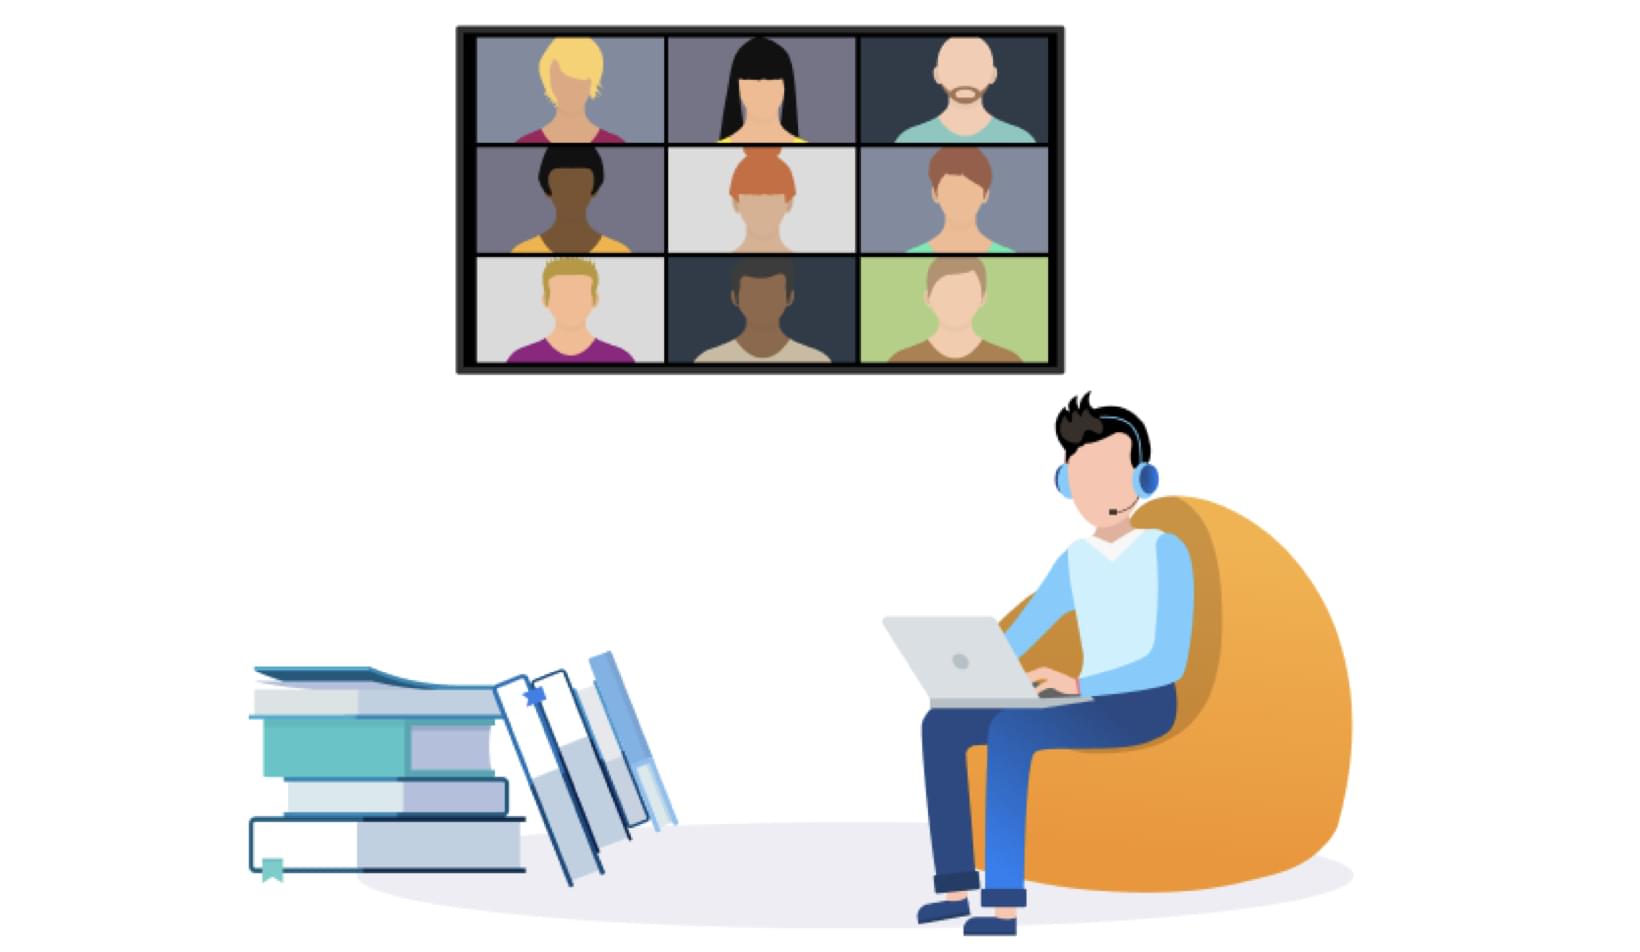 Zoom for Educators: How to Set Up Virtual Classrooms for Distance Learning